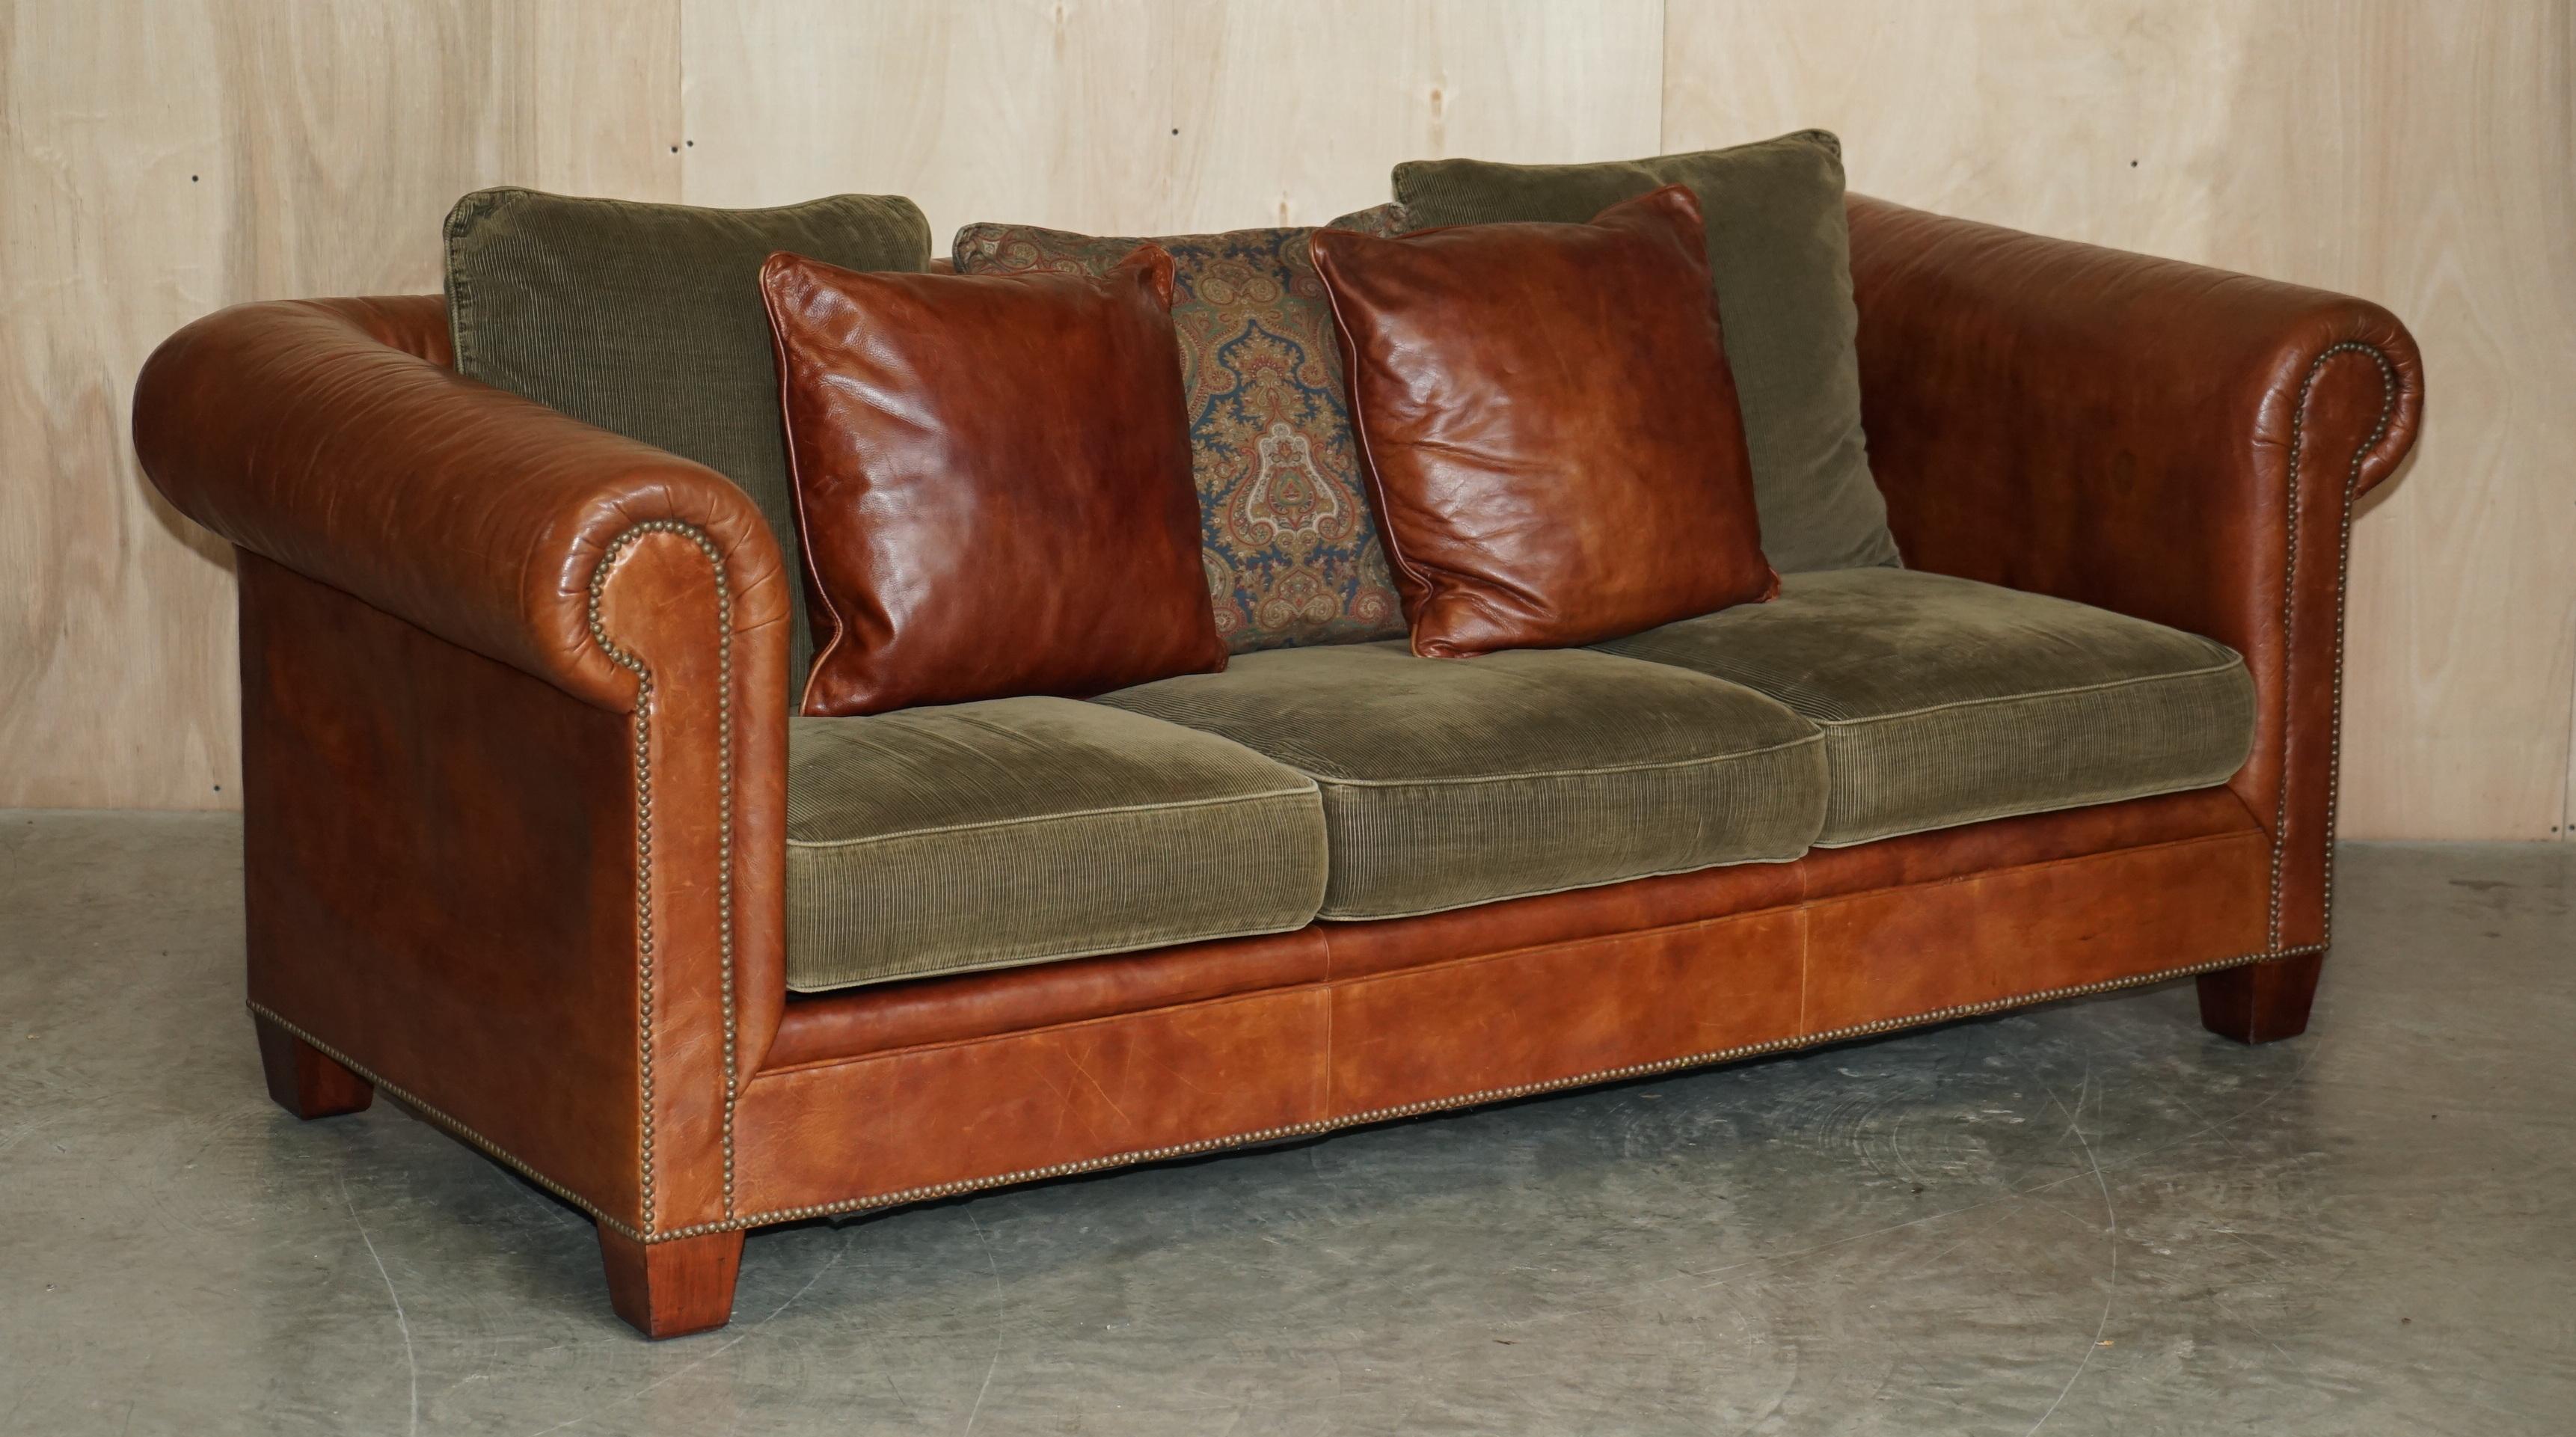 We are delighted to offer for sale this vintage, Ralph Lauren Madison Ave New York club sofa and matching armchair in heritage brown leather

A very nicely made, homely, oversized club sofa and armchair set, upholstered in heritage brown leather